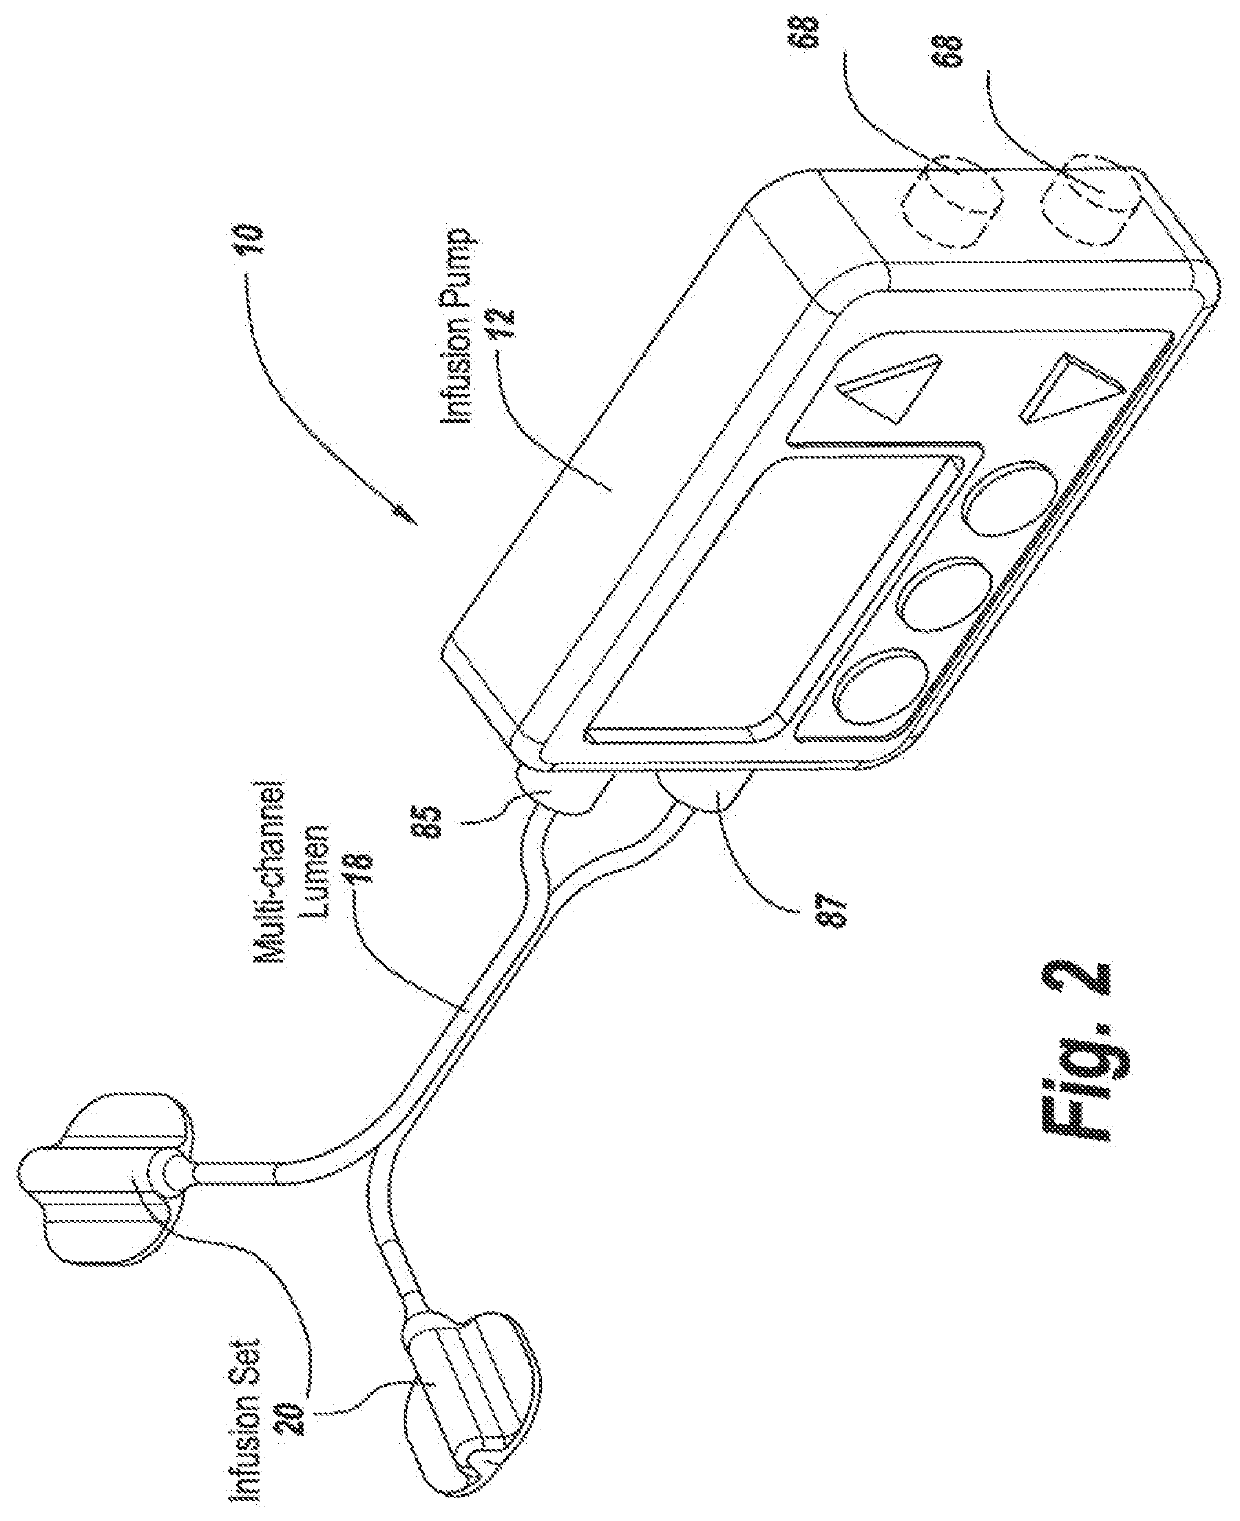 Infusion pump and system for preventing mischanneling of multiple medicaments